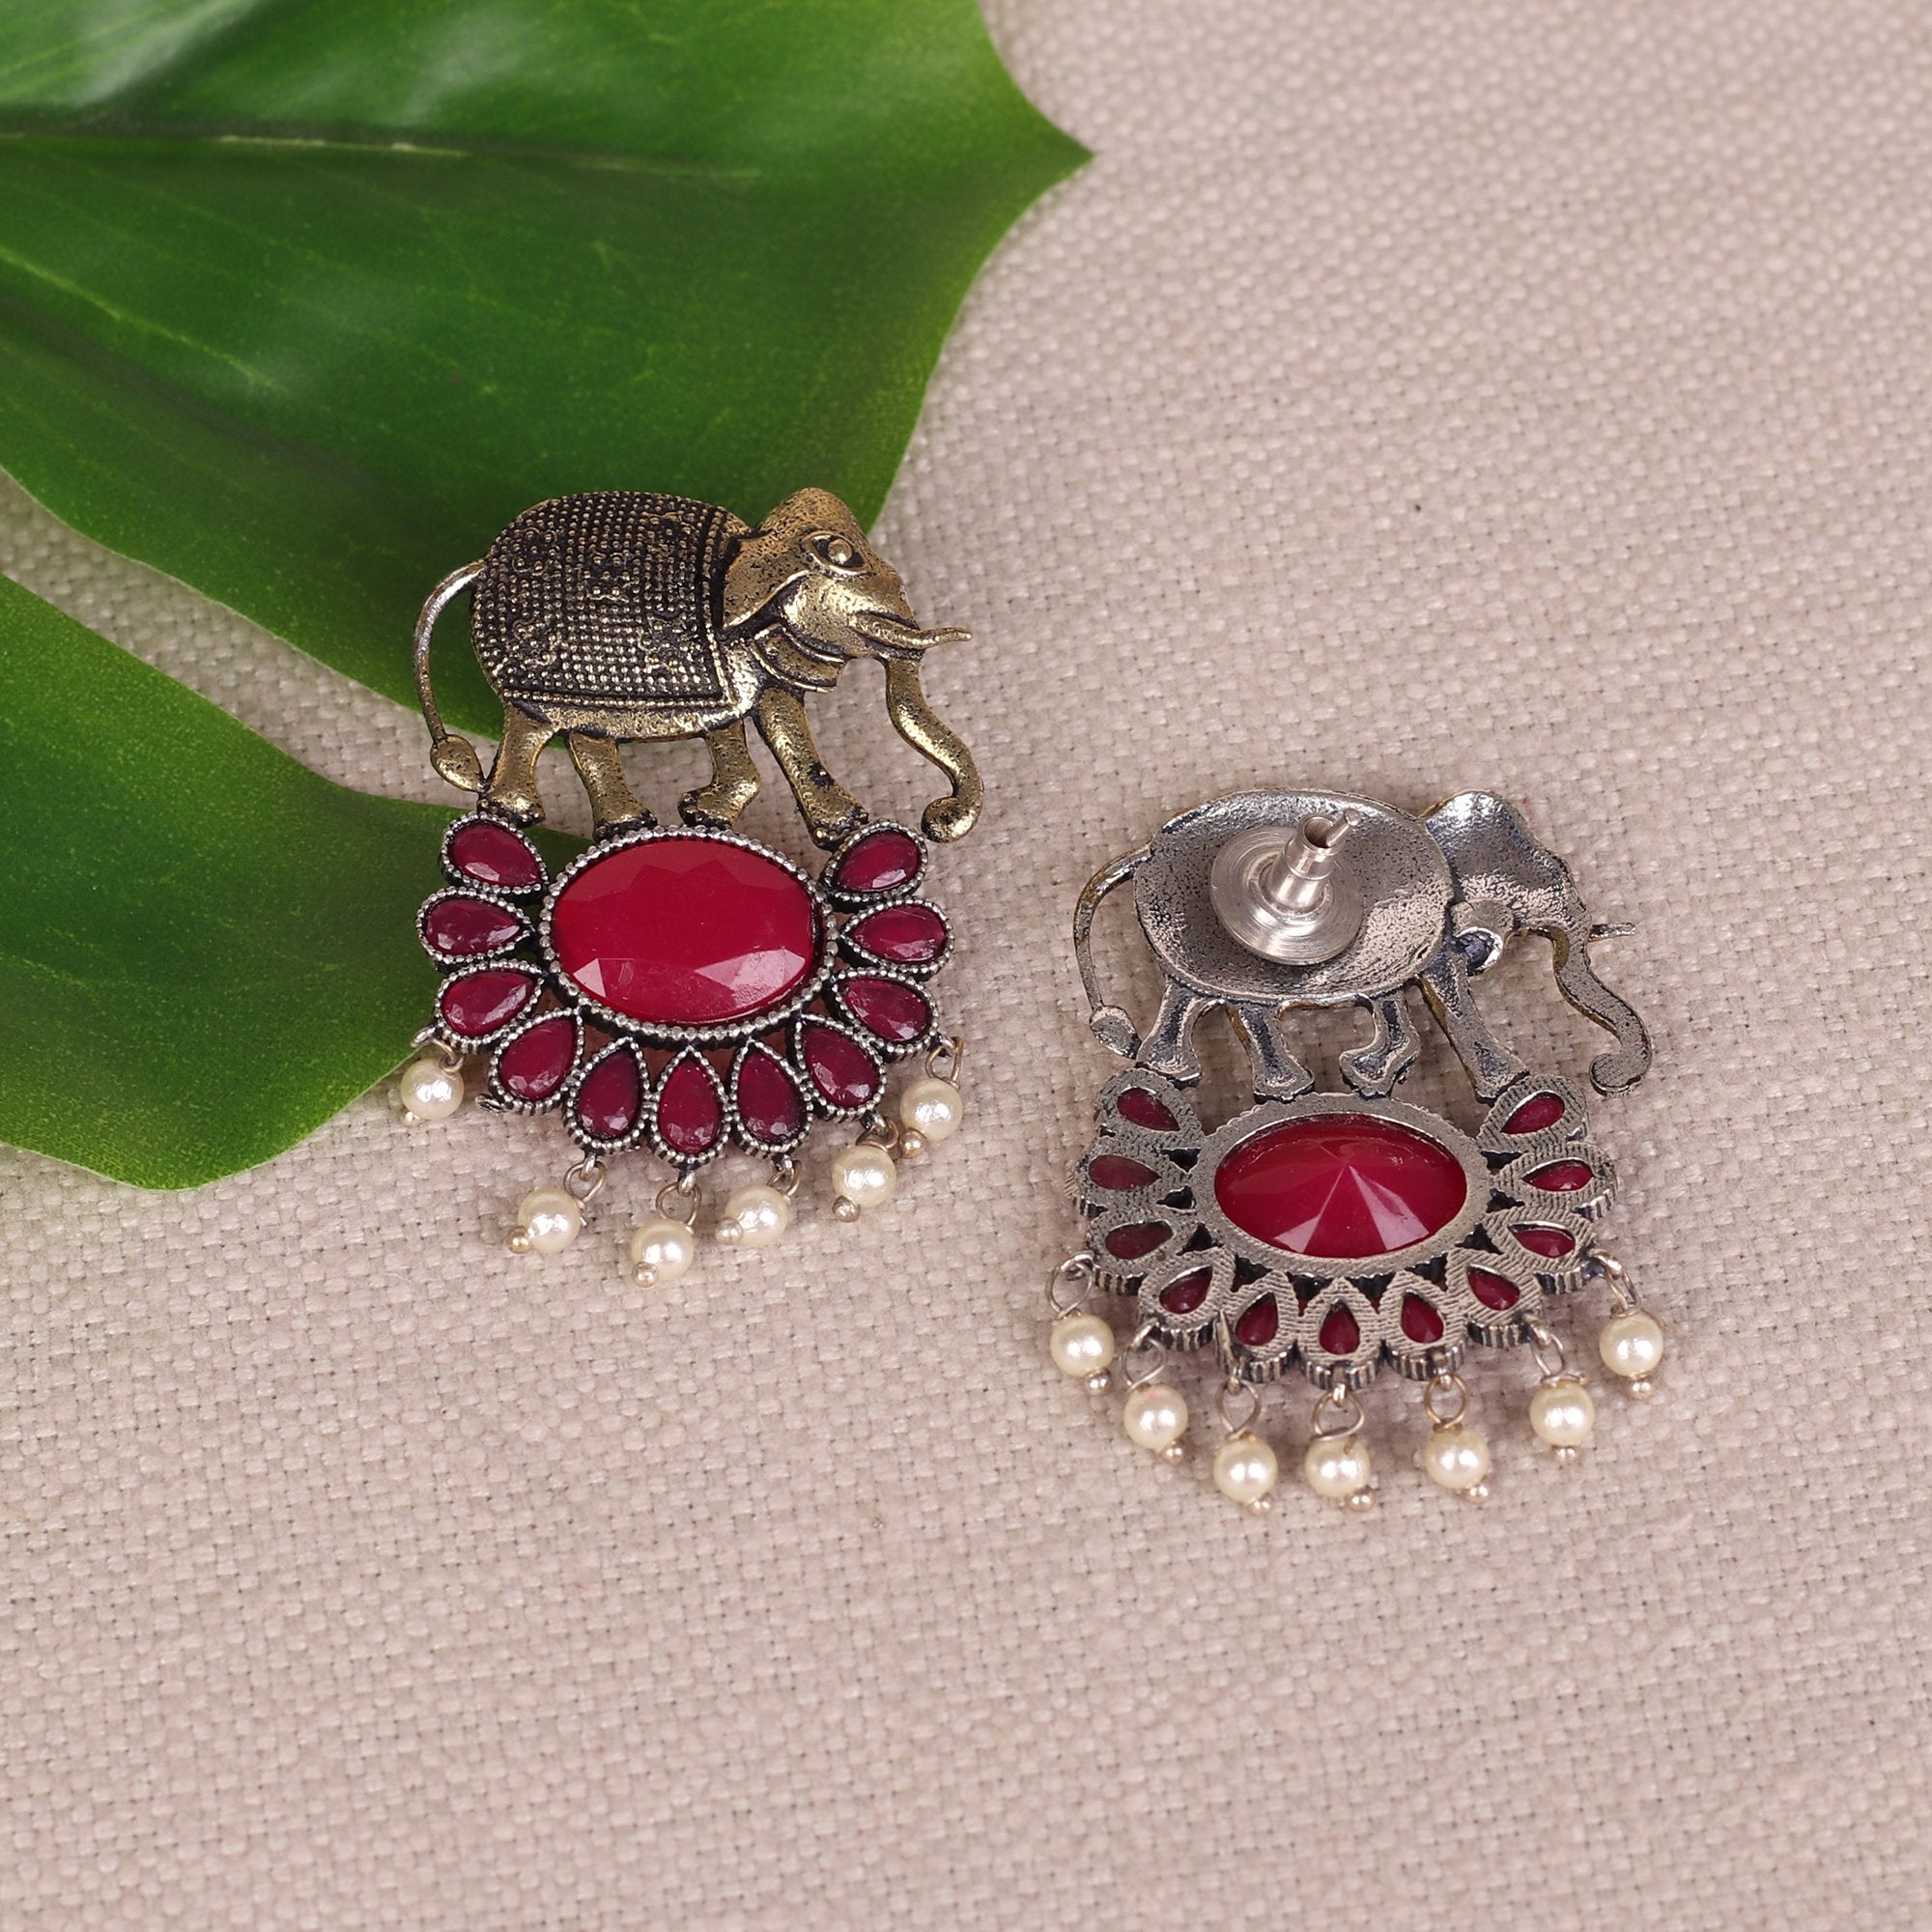 Elephant Motif Earings With Red Stones